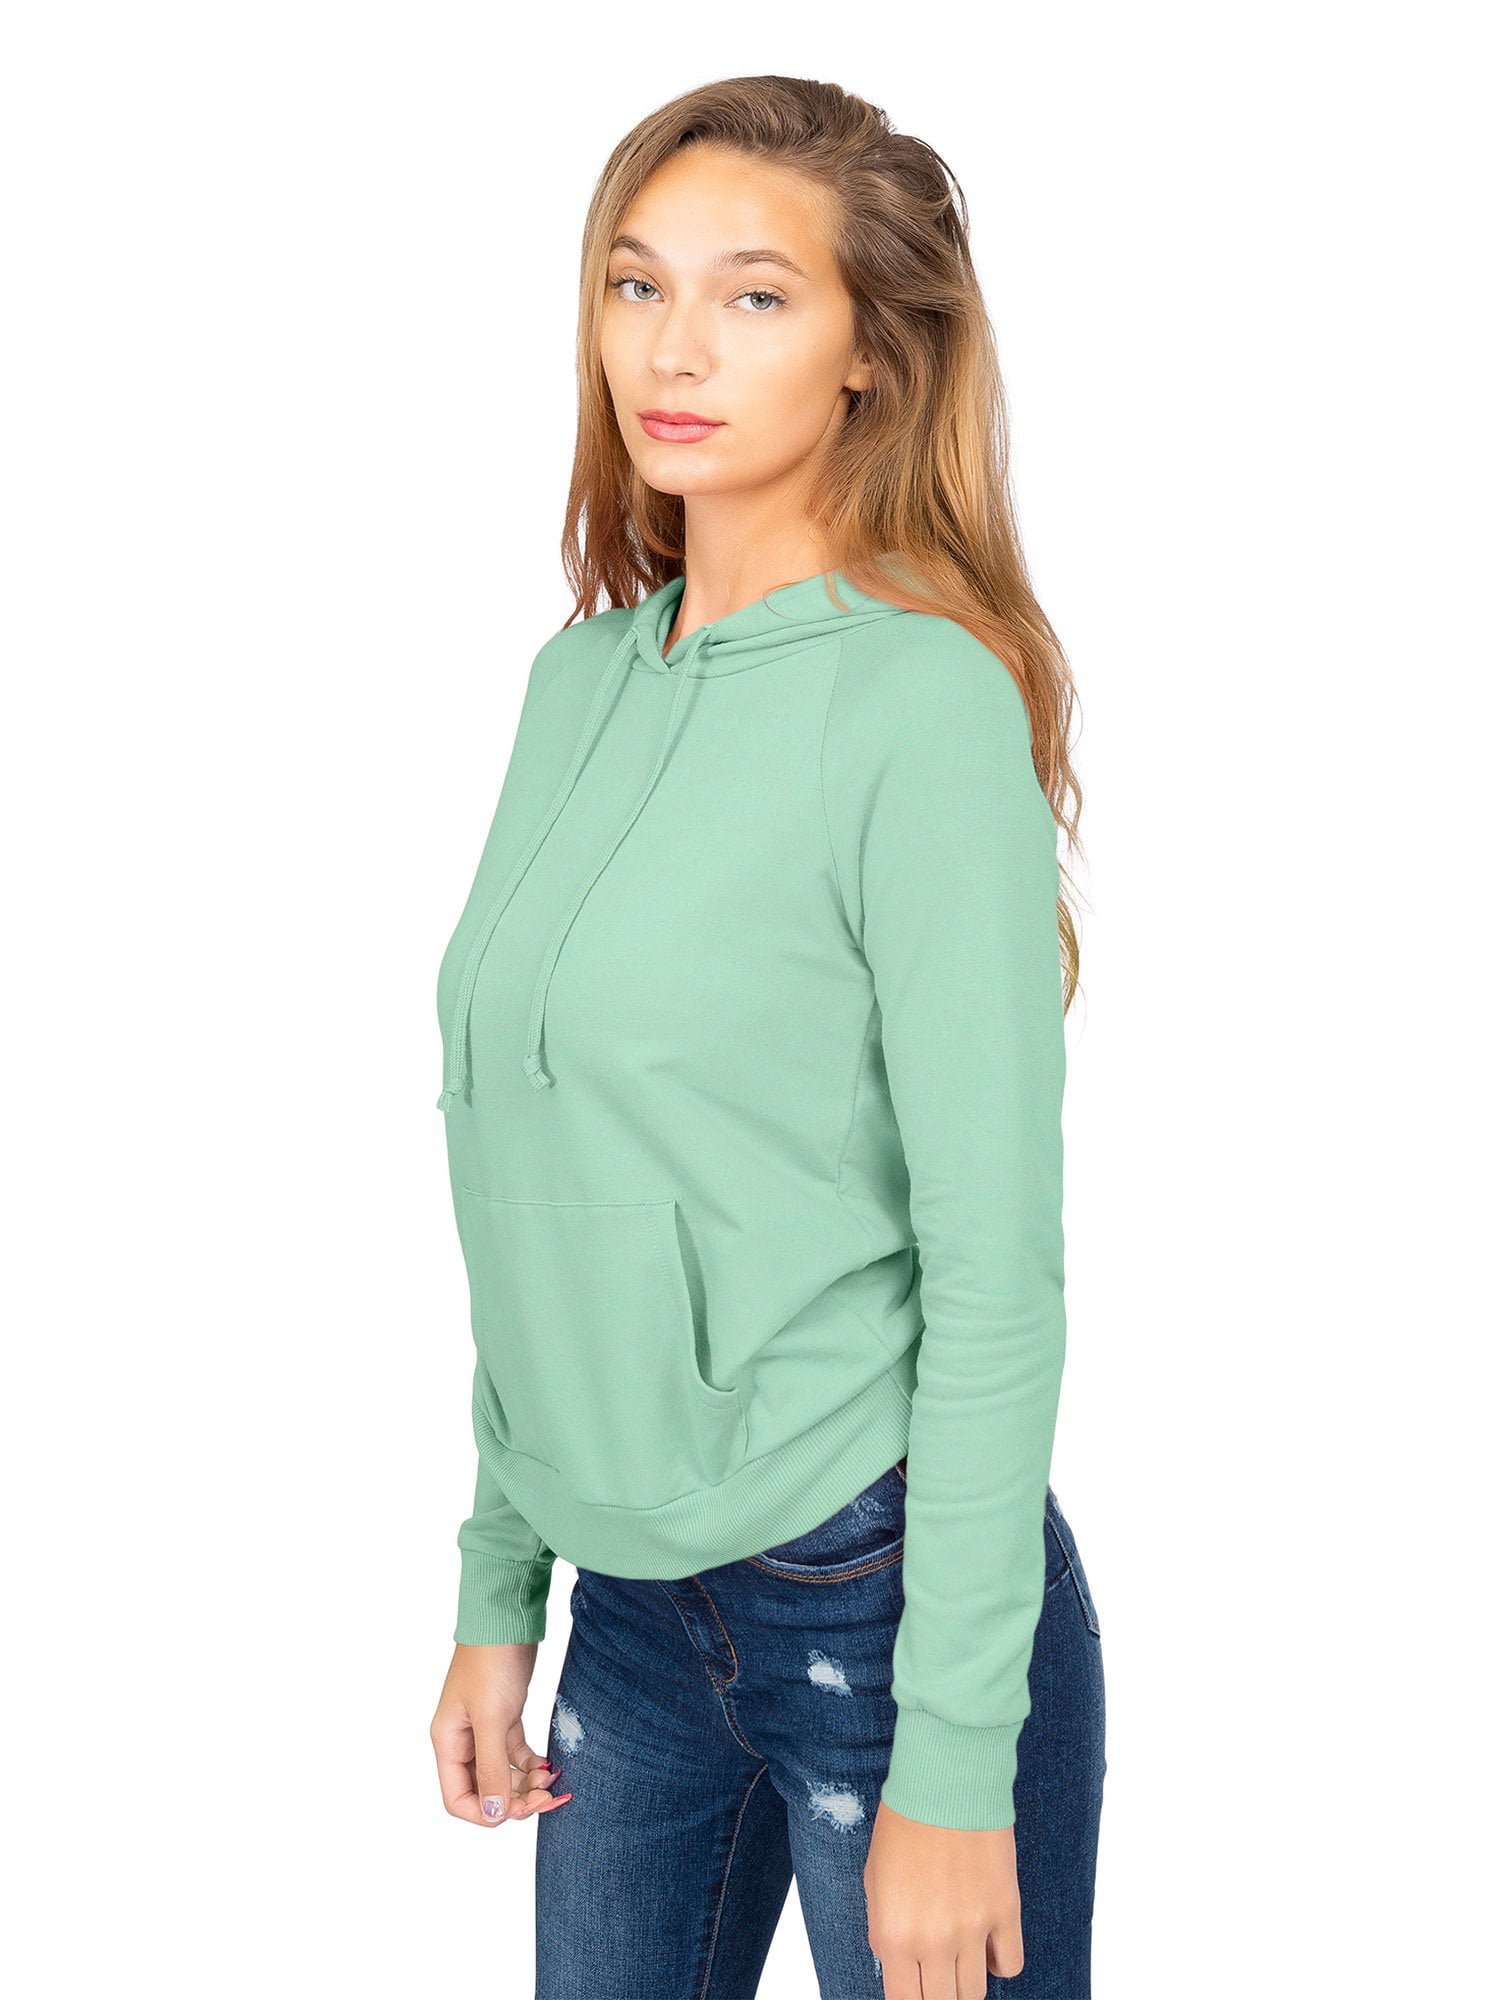 Women's Long Sleeve Sweatshirt French Terry Pullover Hoodie T1481 - Melon  Green - Small